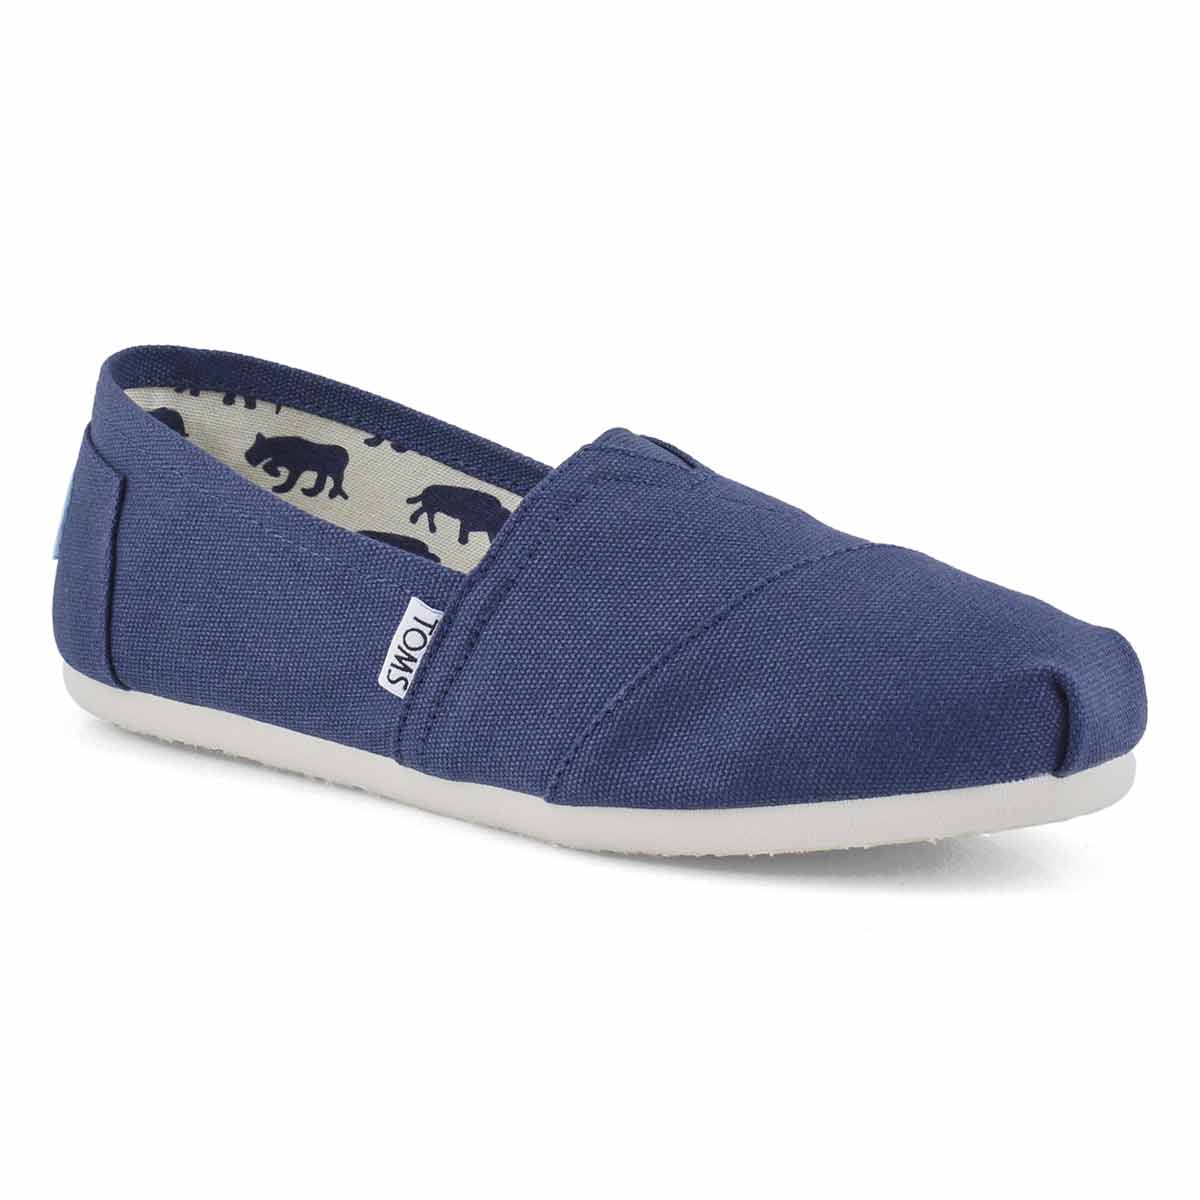 Women's Classic Canvas Loafer - Navys